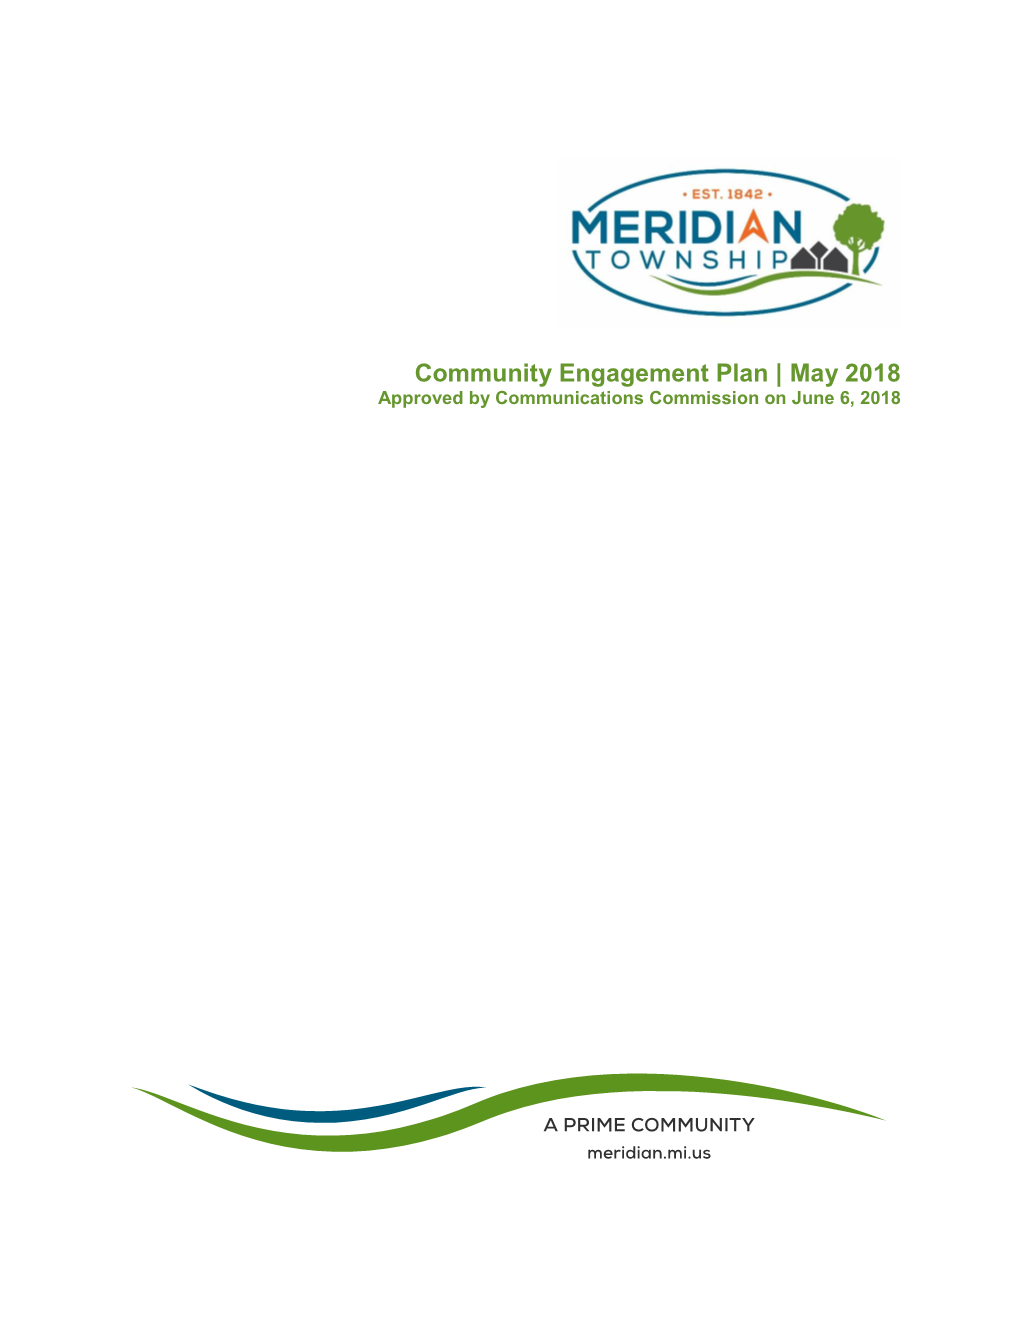 Community Engagement Plan | May 2018 Approved by Communications Commission on June 6, 2018